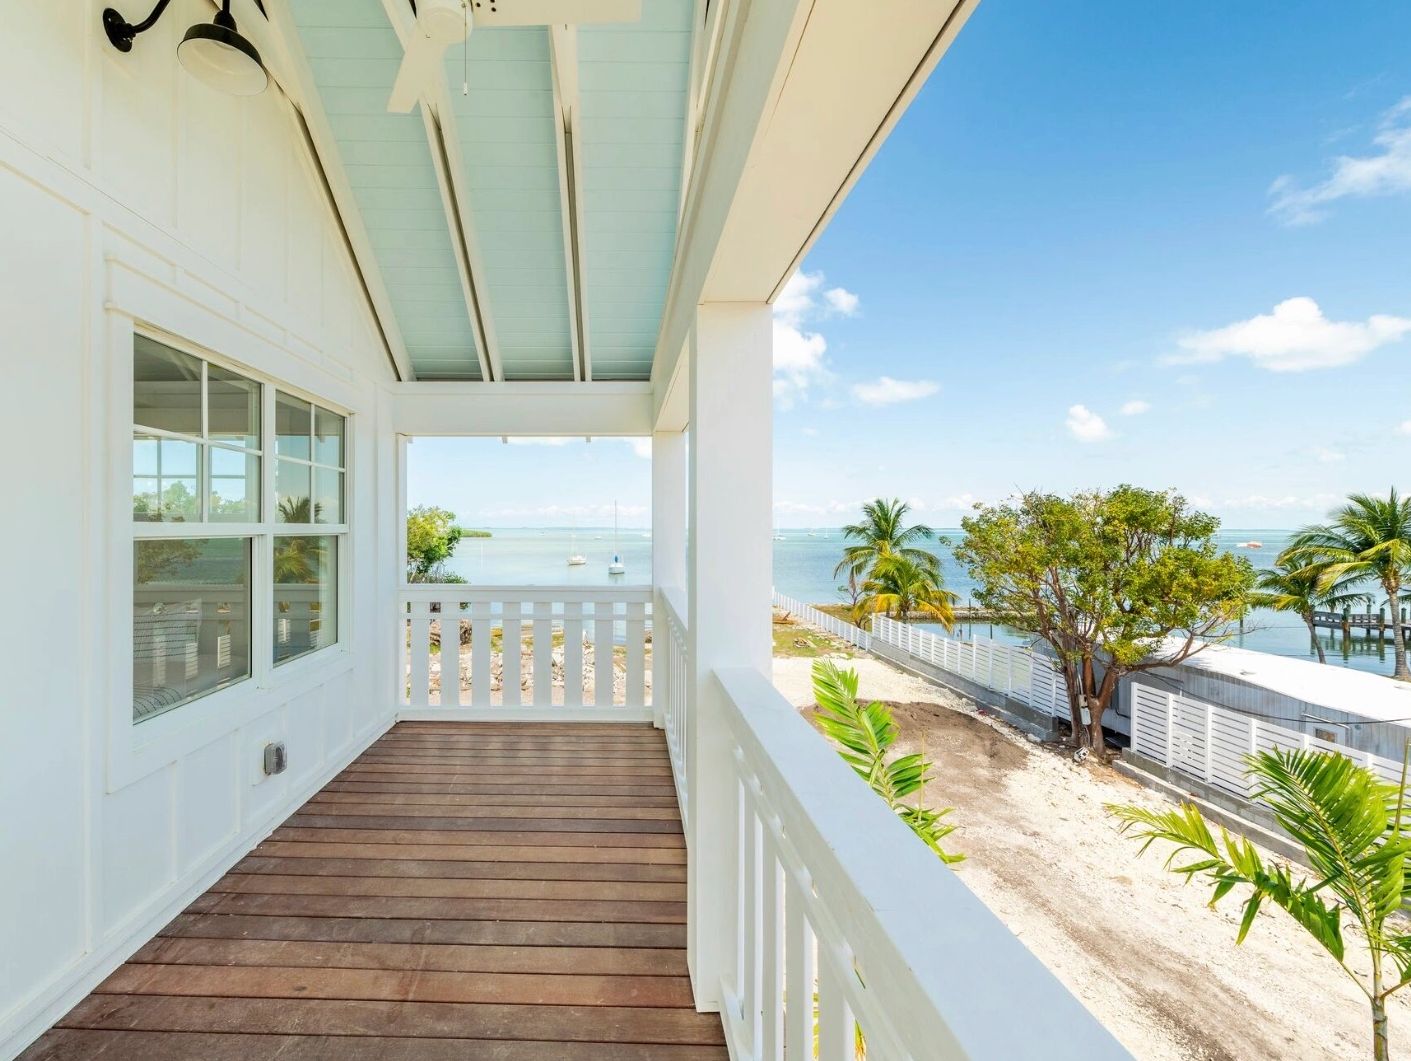 the porch of an Islamorada home is pictured with the ocean in the distance.